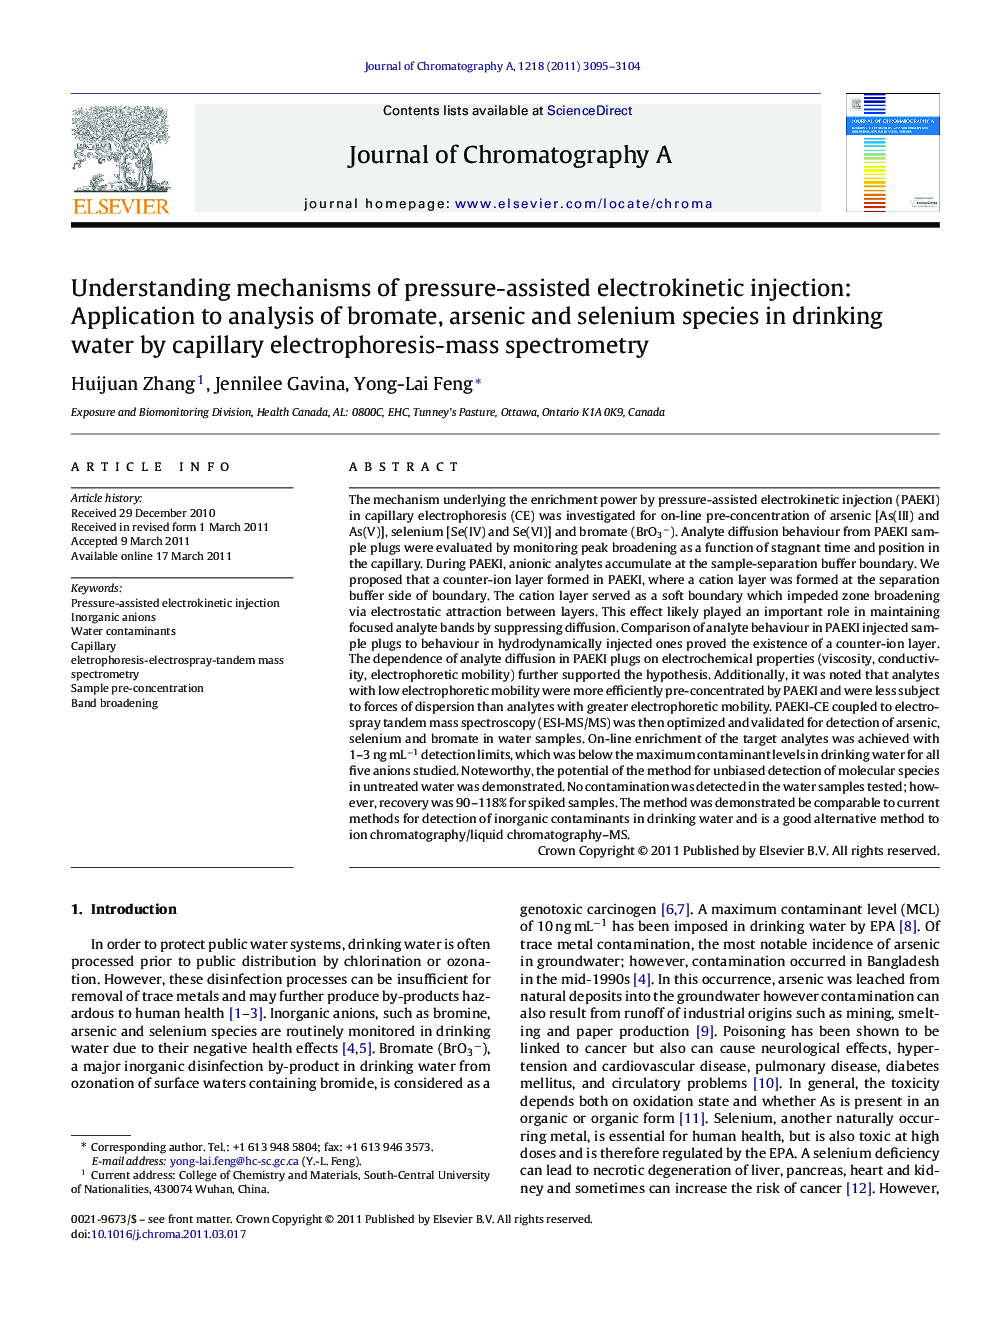 Understanding mechanisms of pressure-assisted electrokinetic injection: Application to analysis of bromate, arsenic and selenium species in drinking water by capillary electrophoresis-mass spectrometry